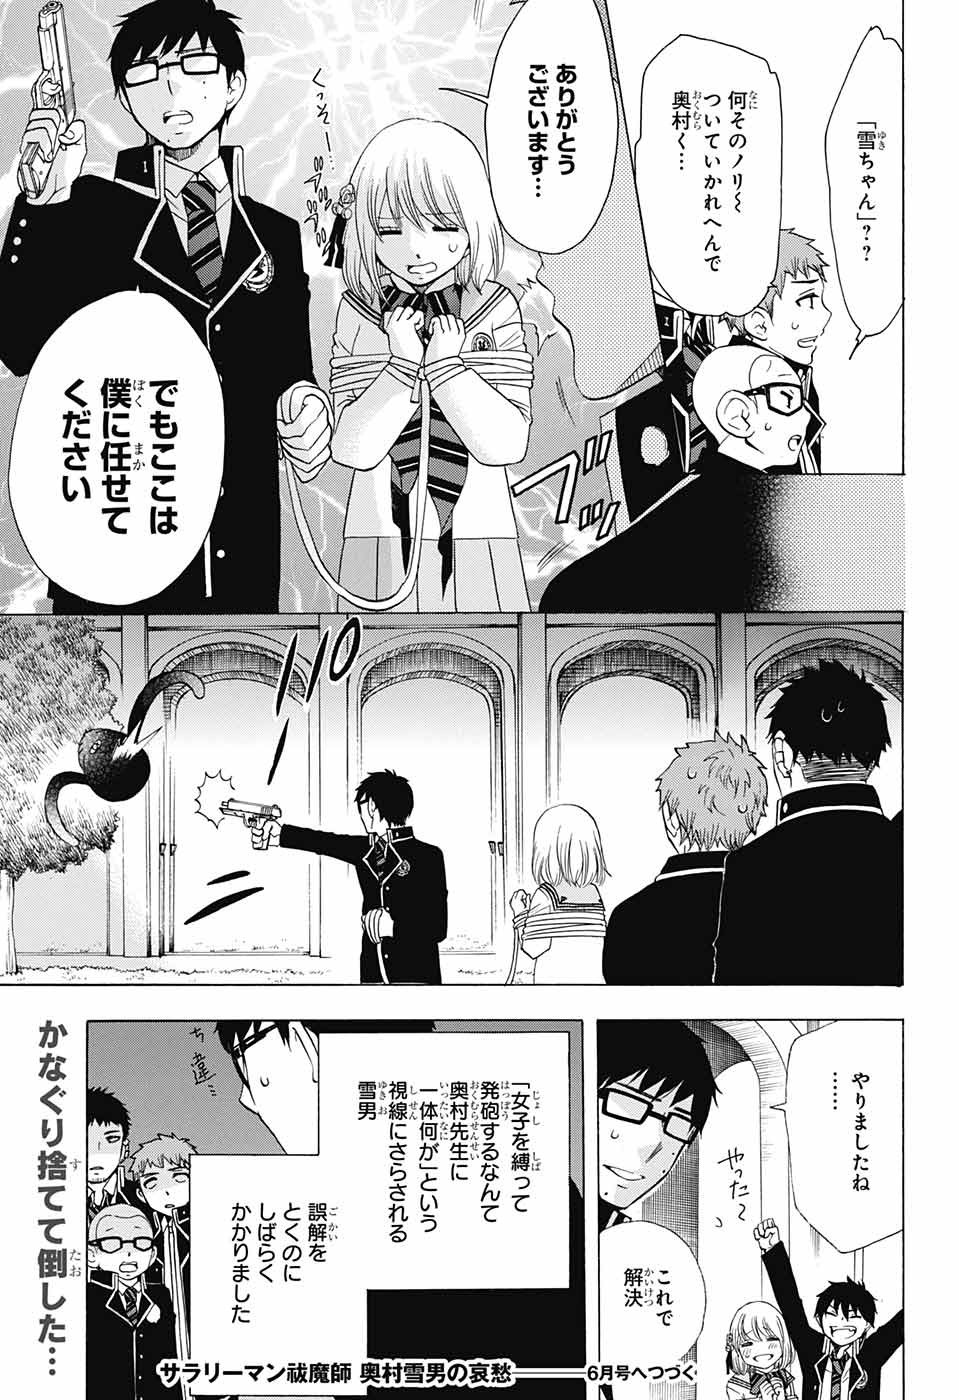 Ao no Exorcist - Chapter 89 - Page 41